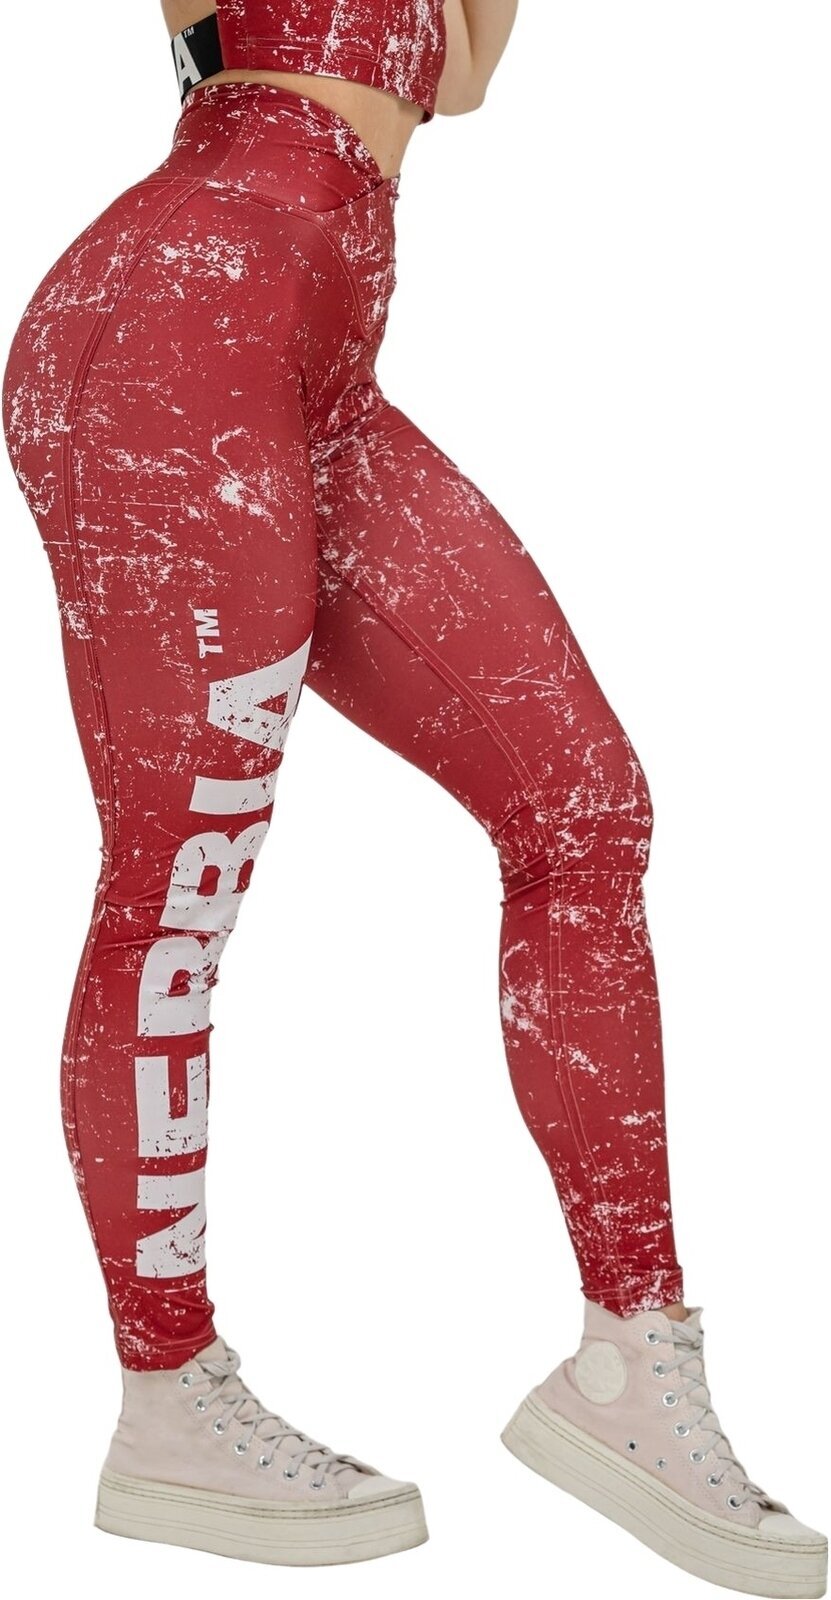 Fitness Hose Nebbia Workout Leggings Rough Girl Red S Fitness Hose